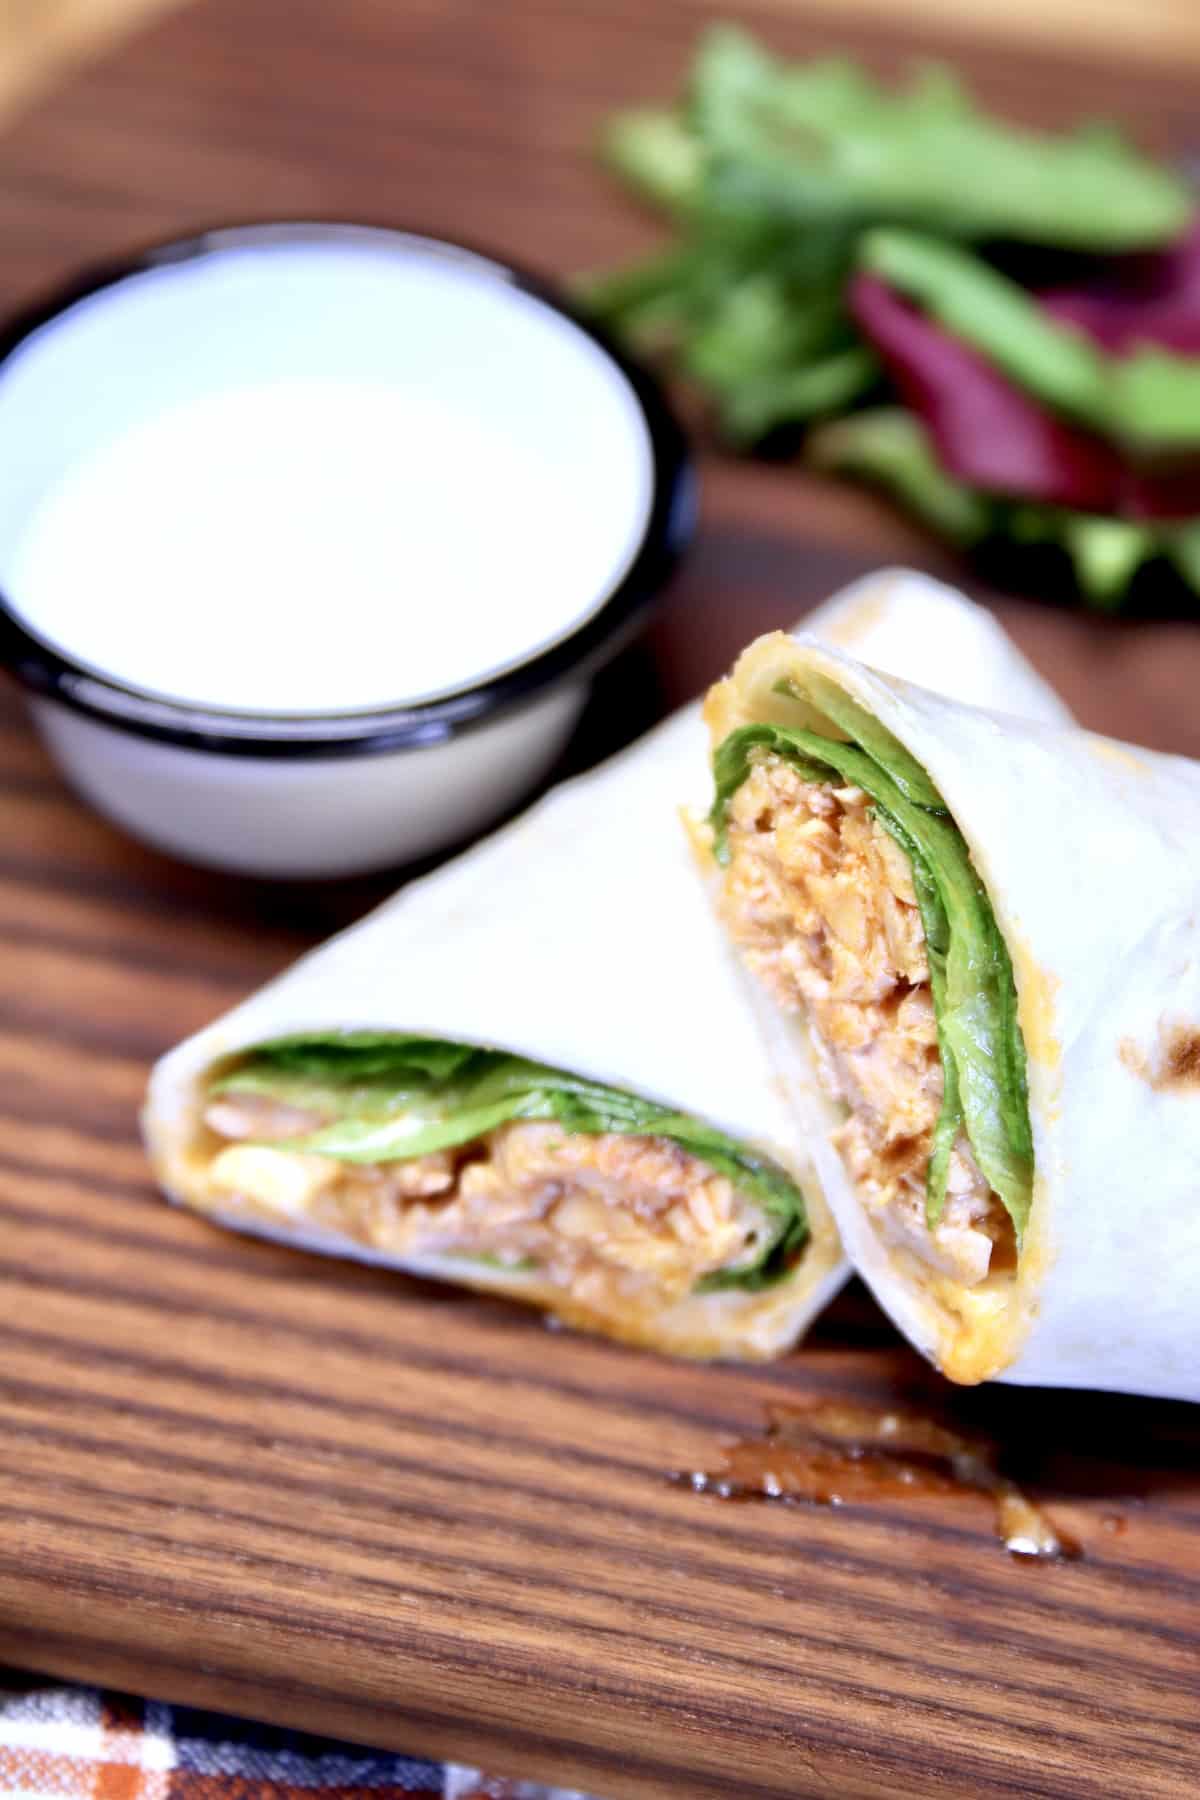 Chicken wrap, cut in half with bowl of ranch.